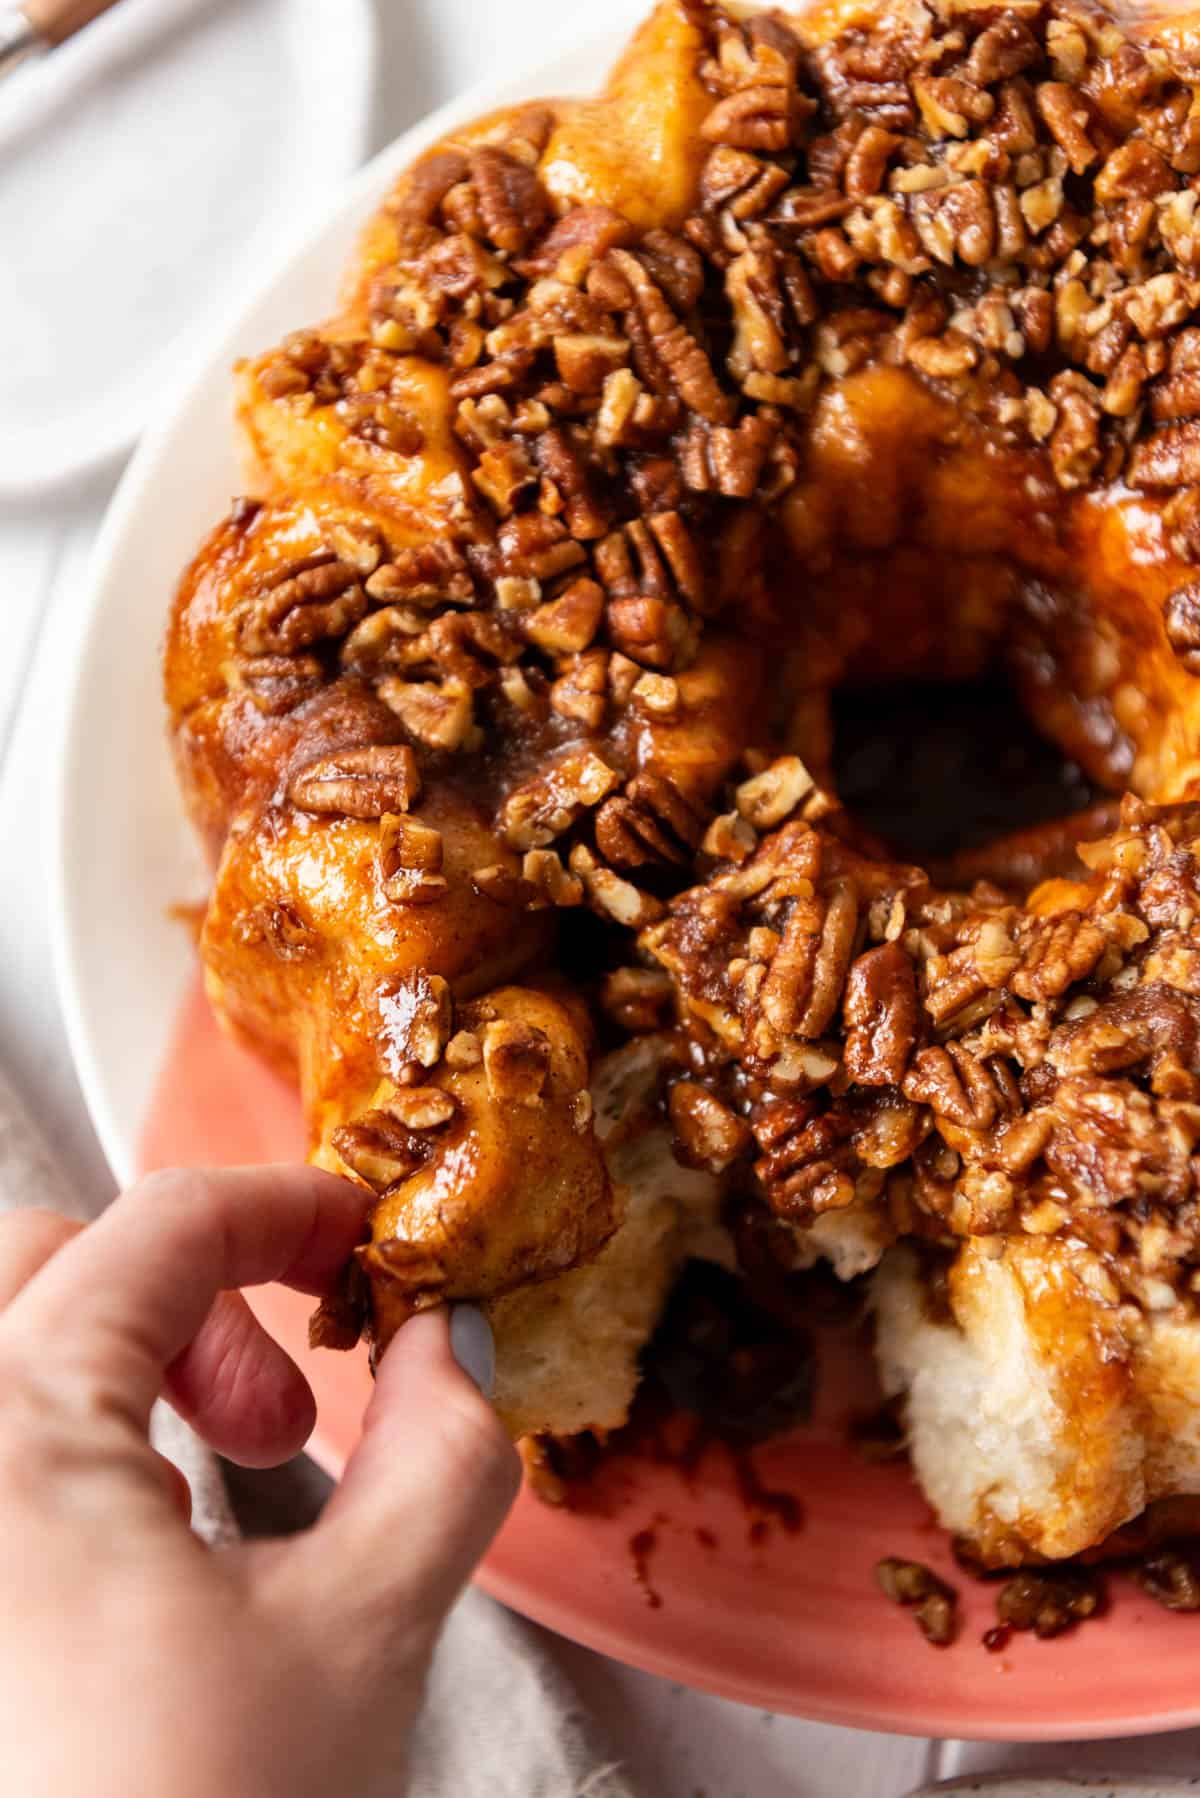 An image of fingers pinching off a piece of monkey bread.